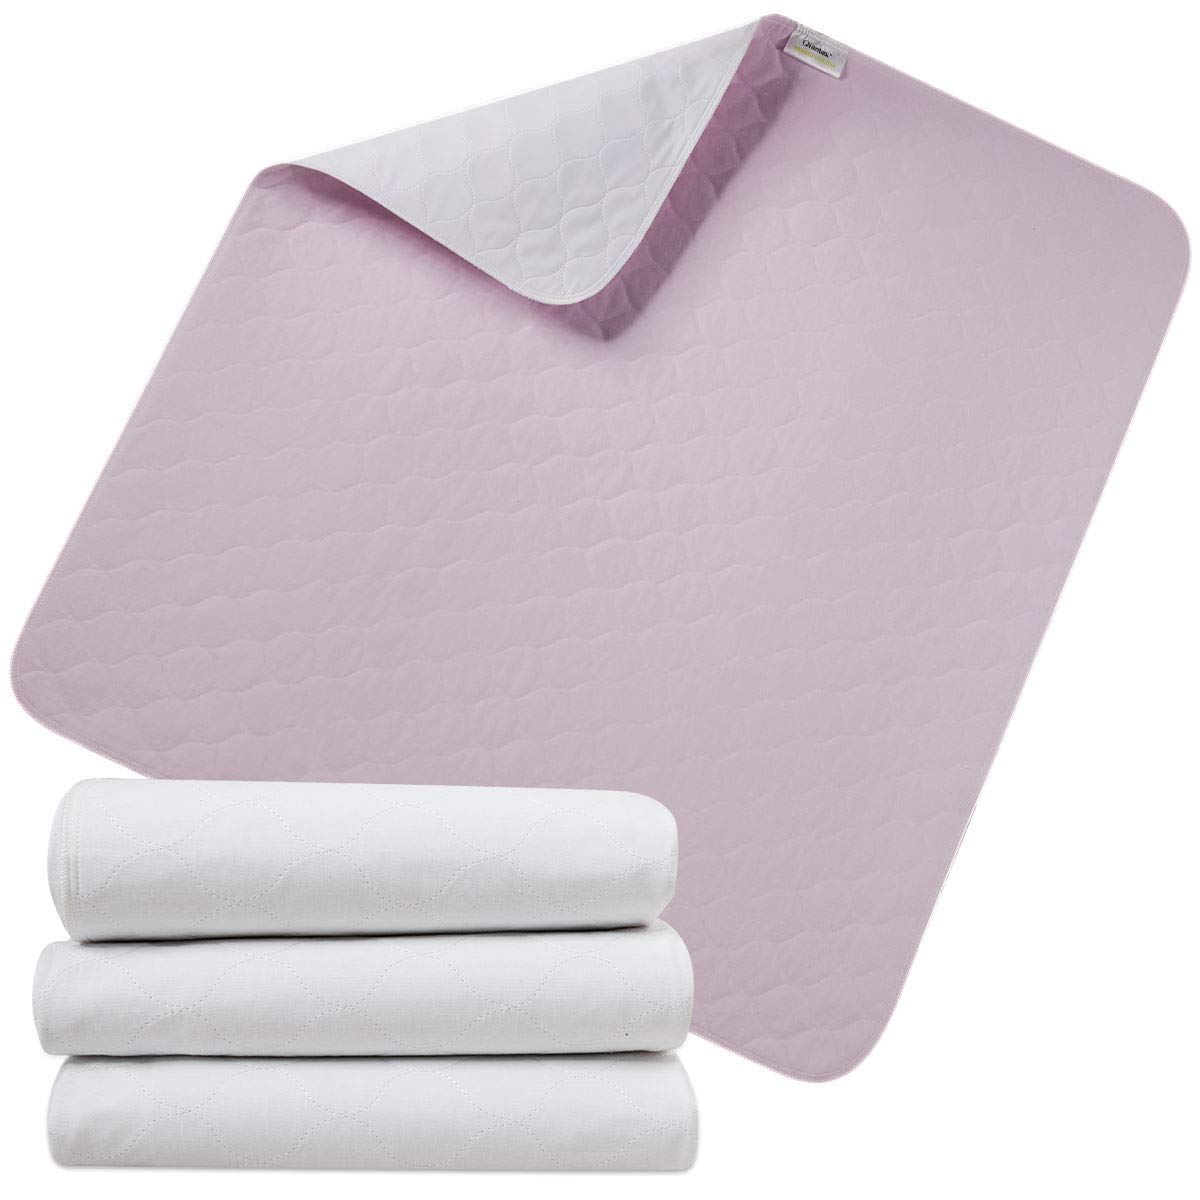 Giantex 4 Pcs Washable Underpads, 36'' x 34'' Waterproof Bed Pads with 4 Layer Protection